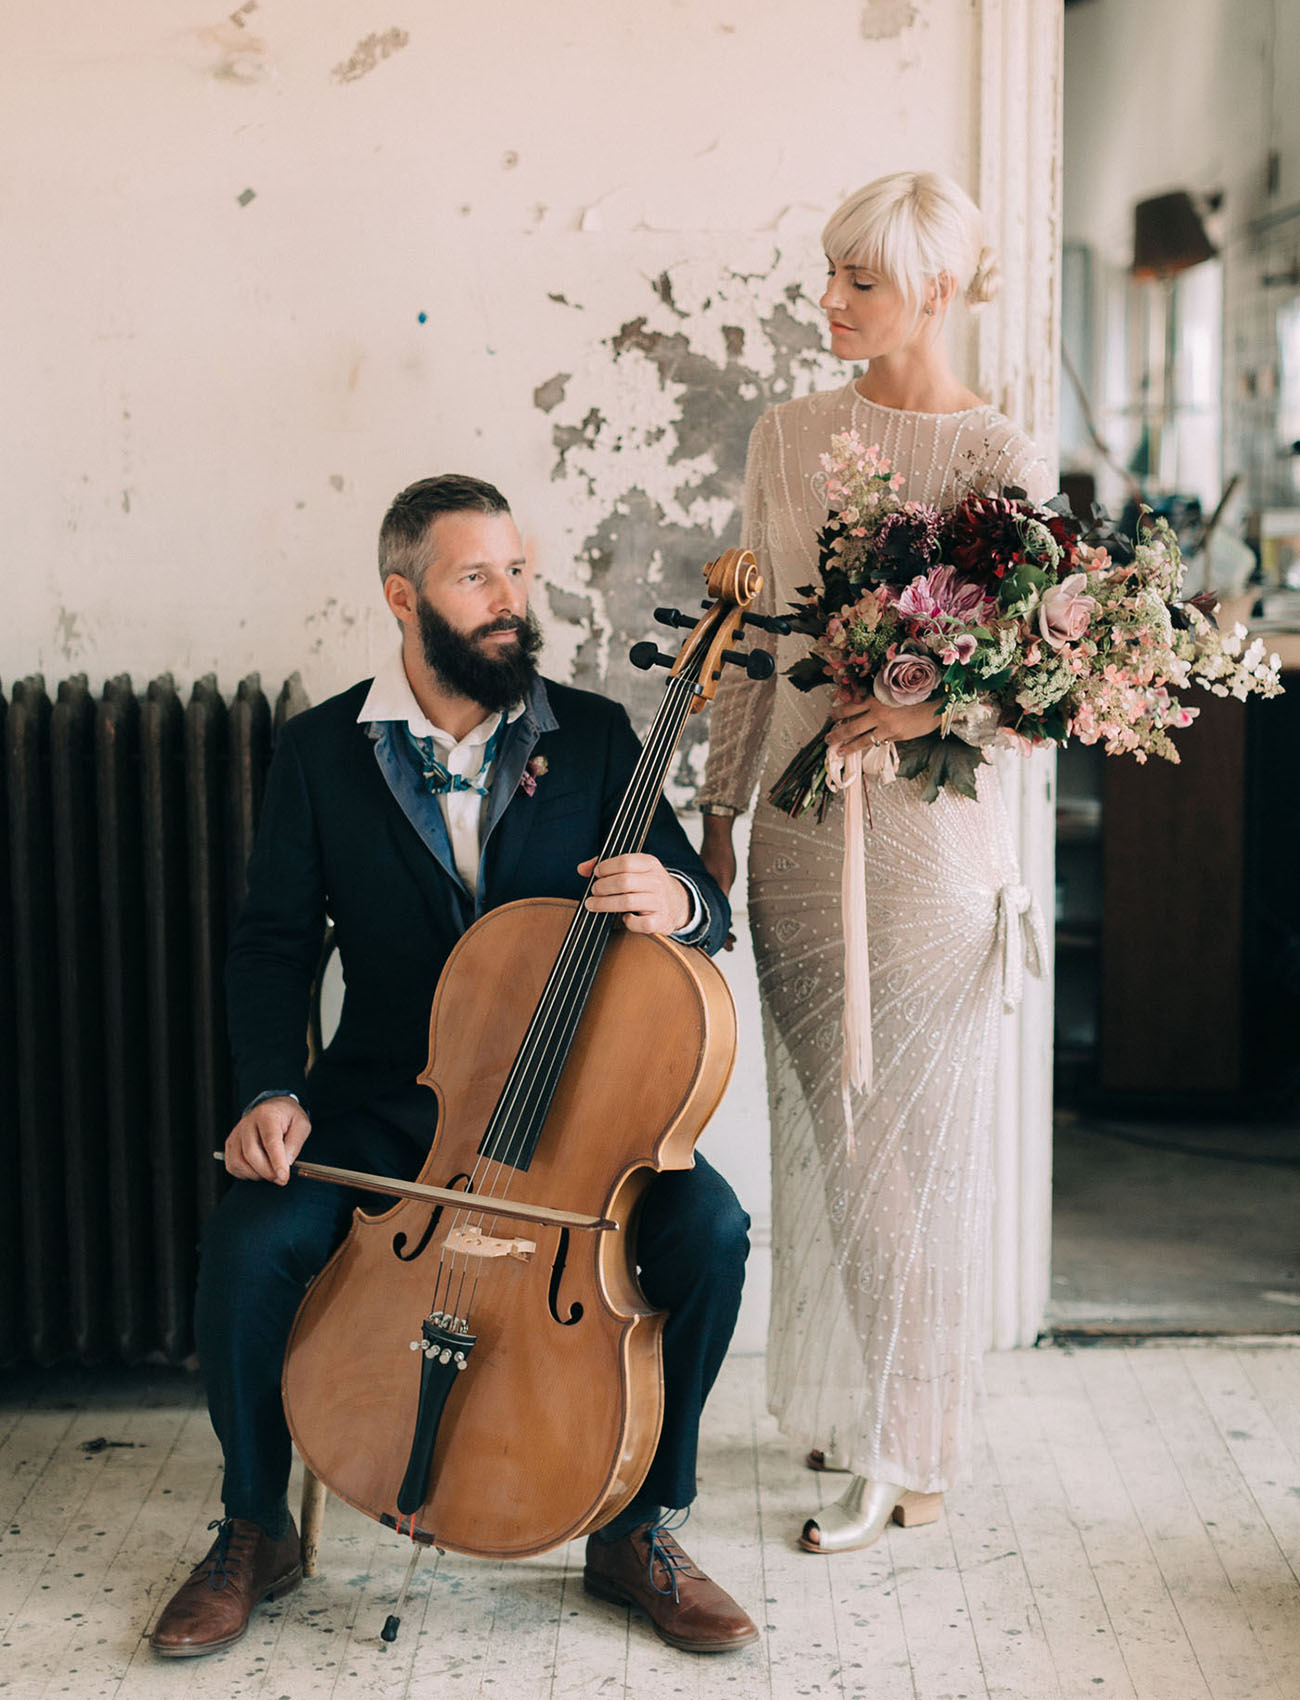 This wedding shoot shows how a wedding of two creative people could look